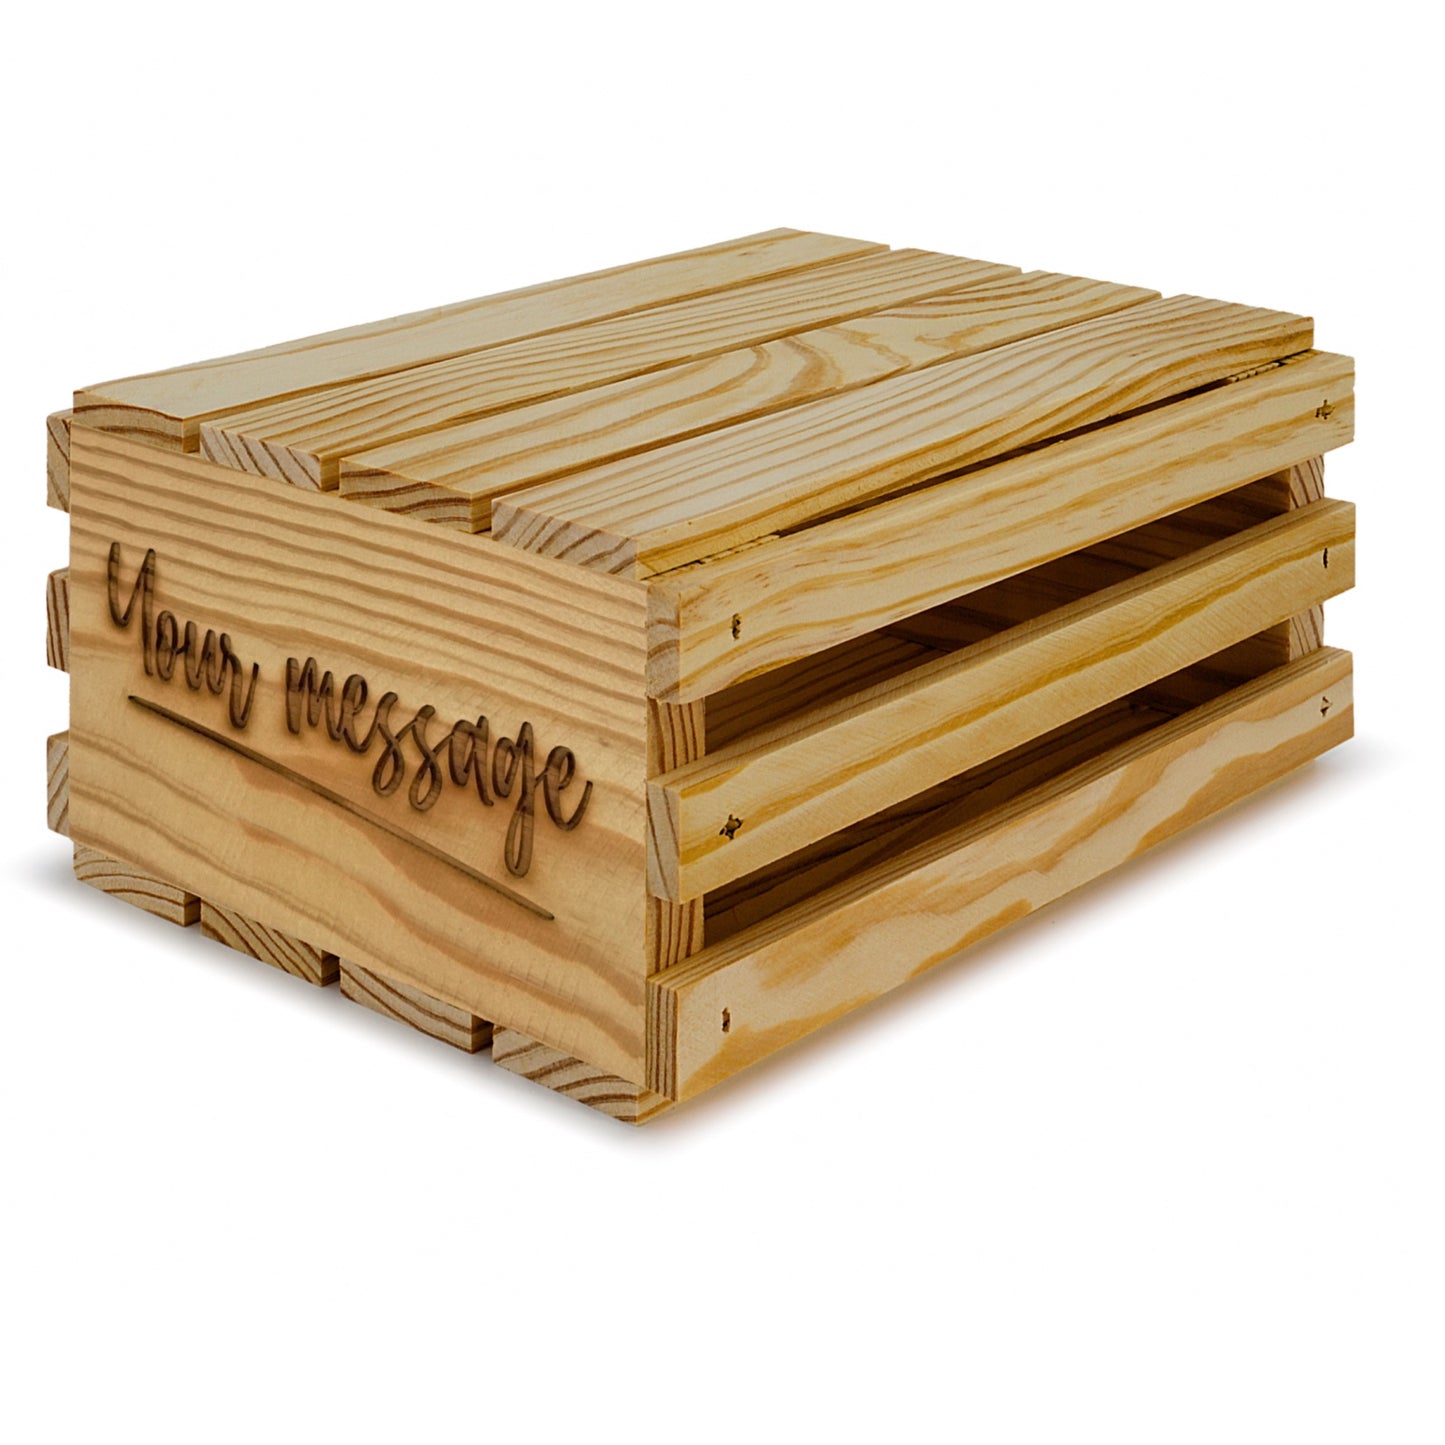 Small wooden crates with lid and your custom message 10x8x4.5, 6-SS-10-8-4.5-ST-NW-LL, 12-SS-10-8-4.5-ST-NW-LL, 24-SS-10-8-4.5-ST-NW-LL, 48-SS-10-8-4.5-ST-NW-LL, 96-SS-10-8-4.5-ST-NW-LL